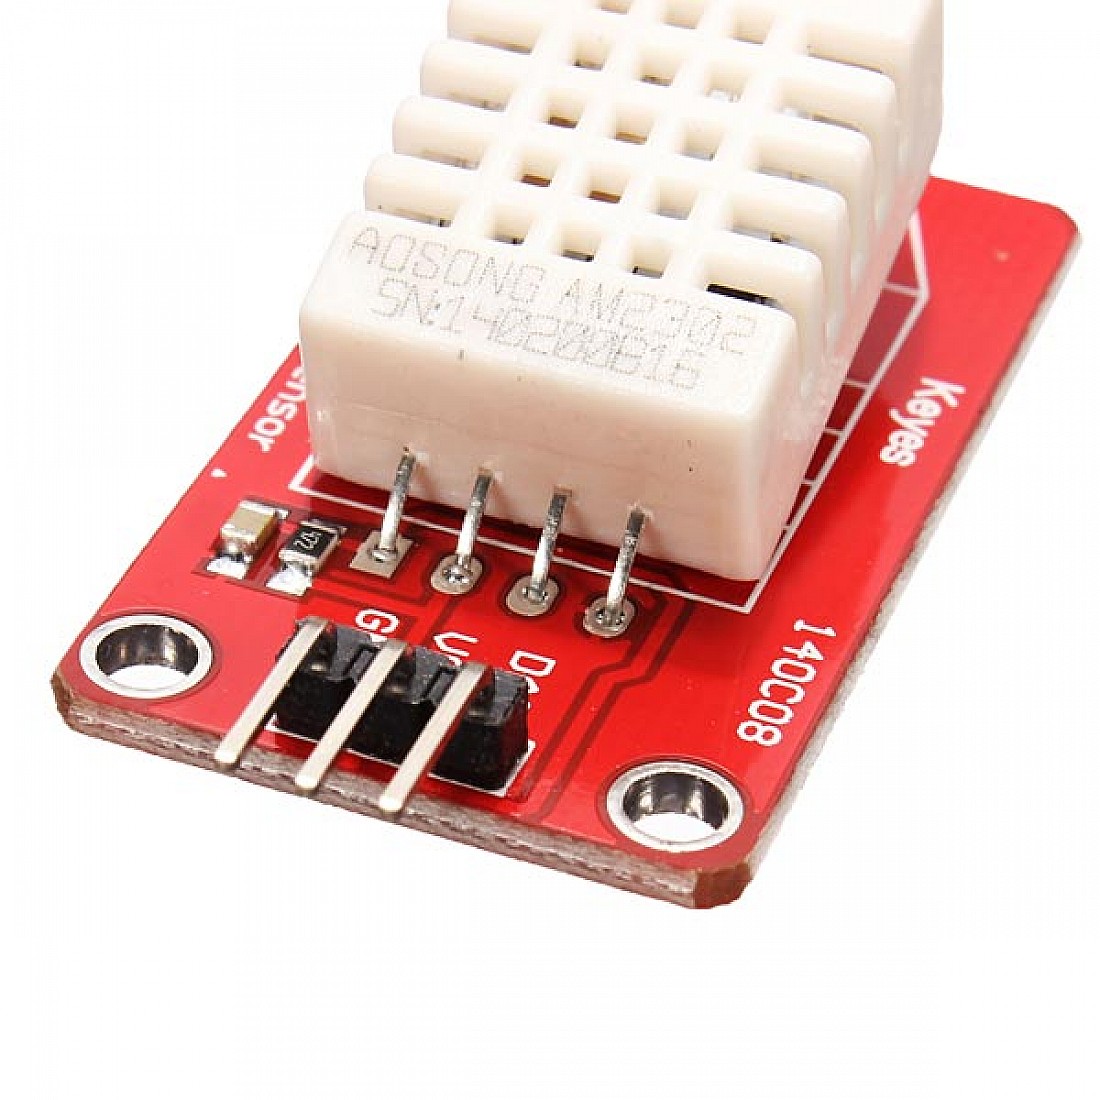 Am2302 Dht22 Temperature And Humidity Sensor Module For Arduino Scm 7486